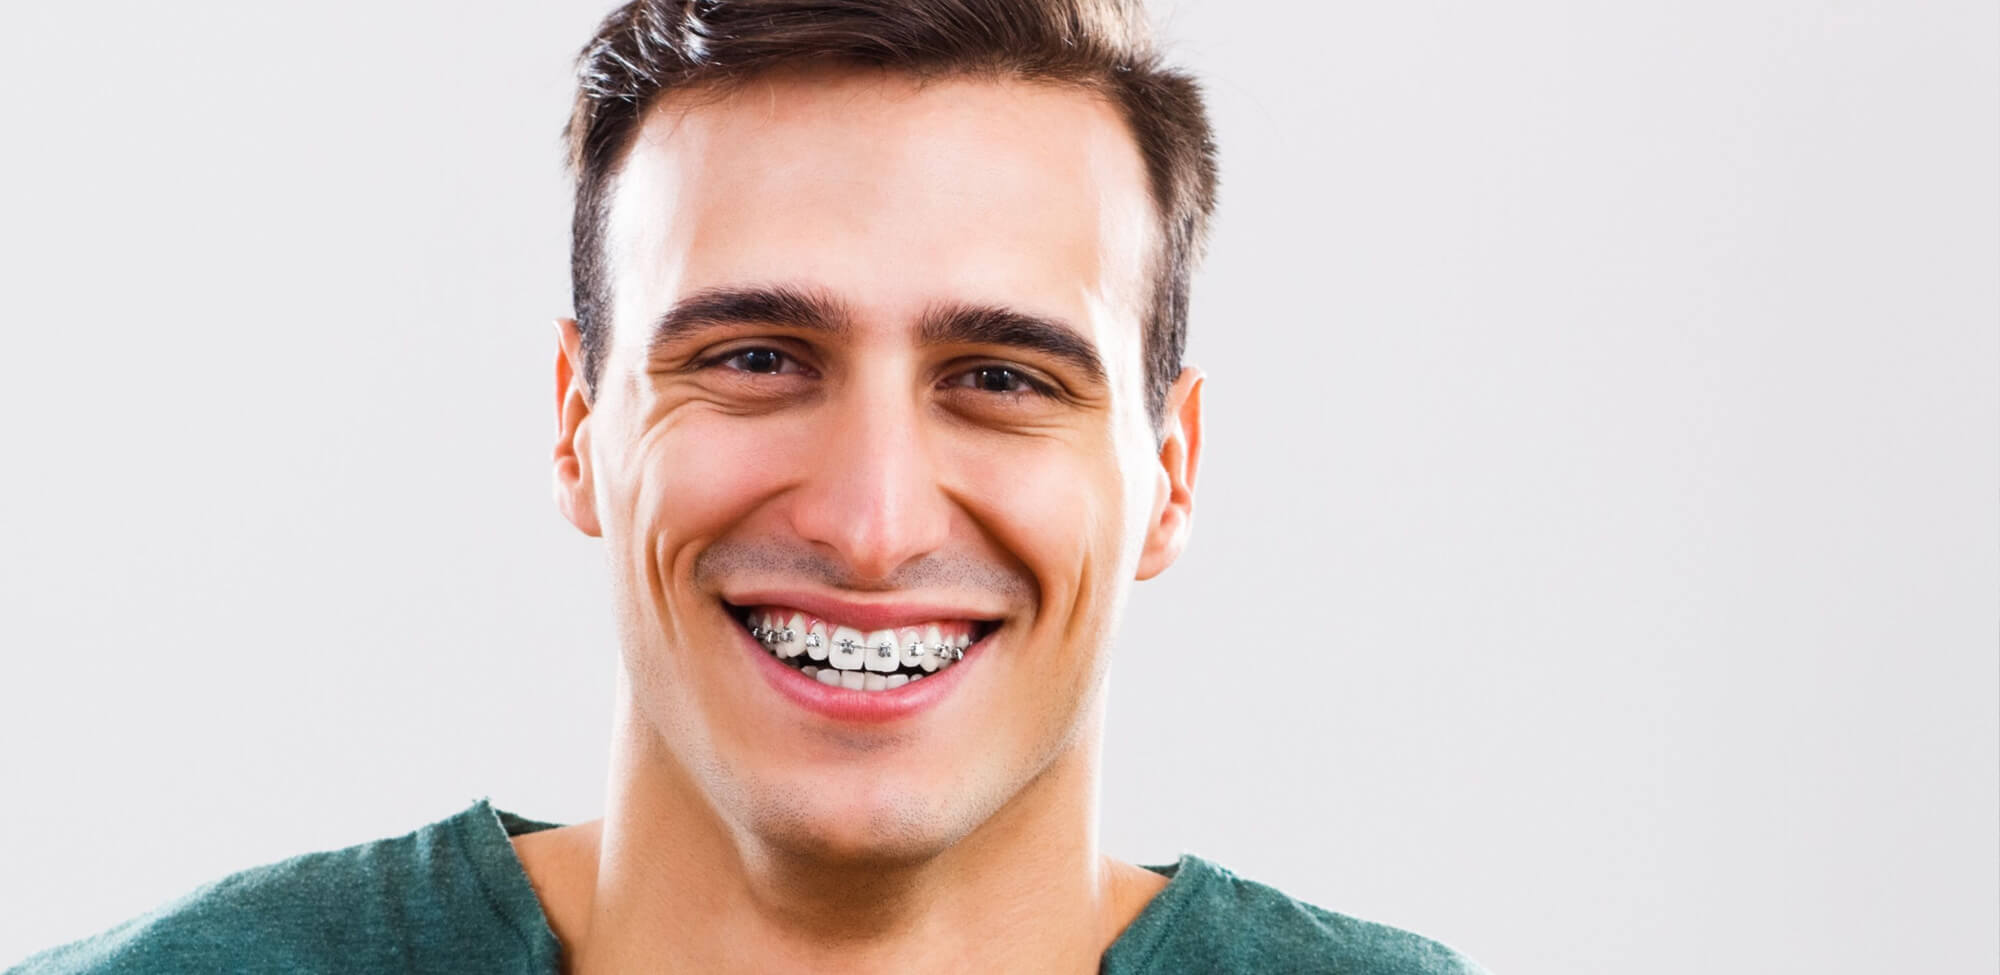 A smiling adult man with braces